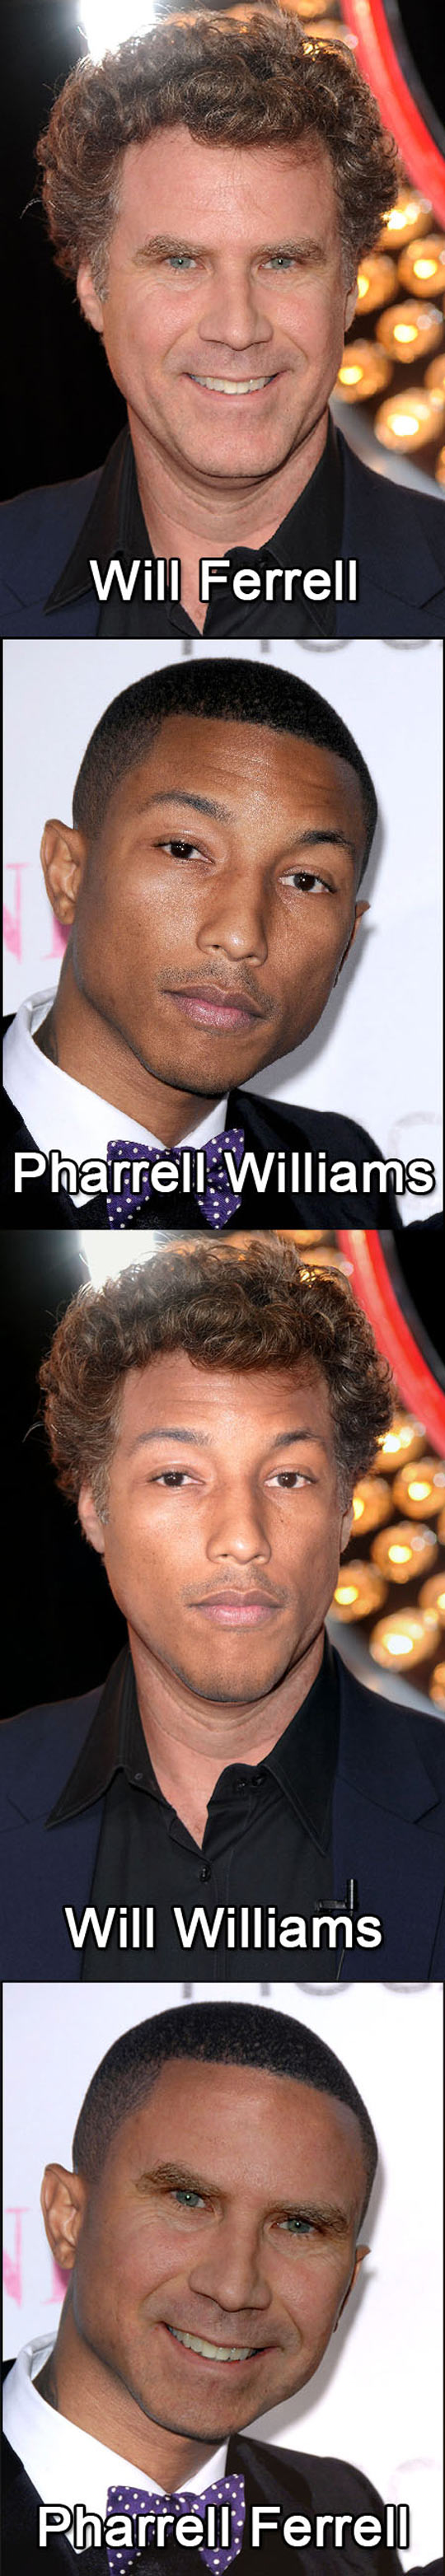 Which Ferrell Is Pharrell?